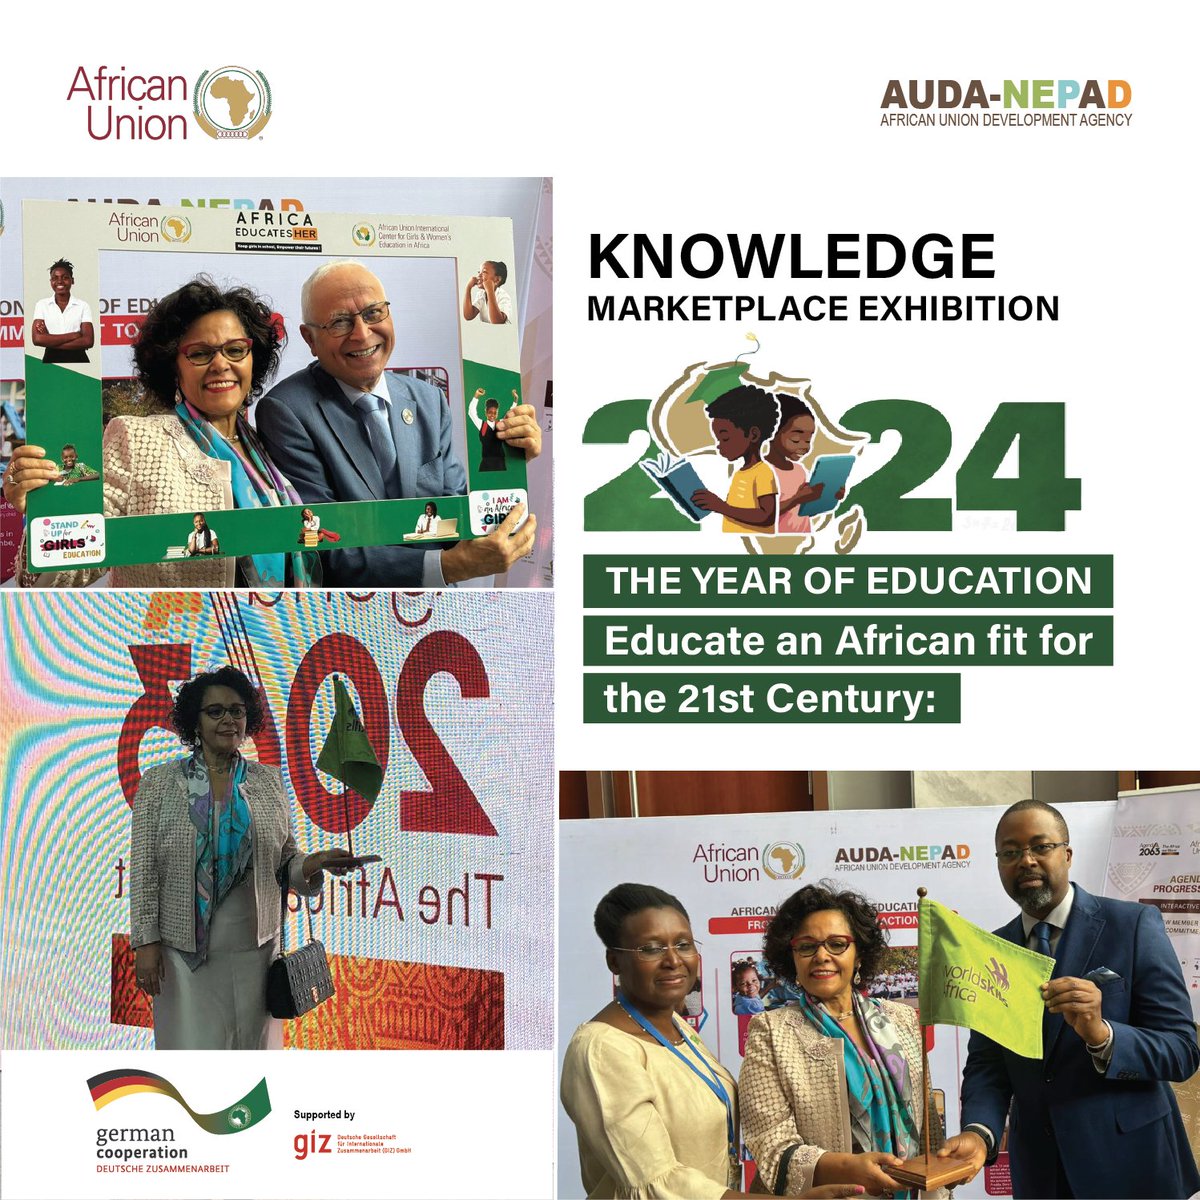 Calling all participants of the 37th Ordinary Session of the Assembly of the Africa Union! Don't miss the Knowledge Marketplace exhibition showcasing education initiatives across Africa in celebration of the @_AfricanUnion Year of Transforming Education and Skilling.